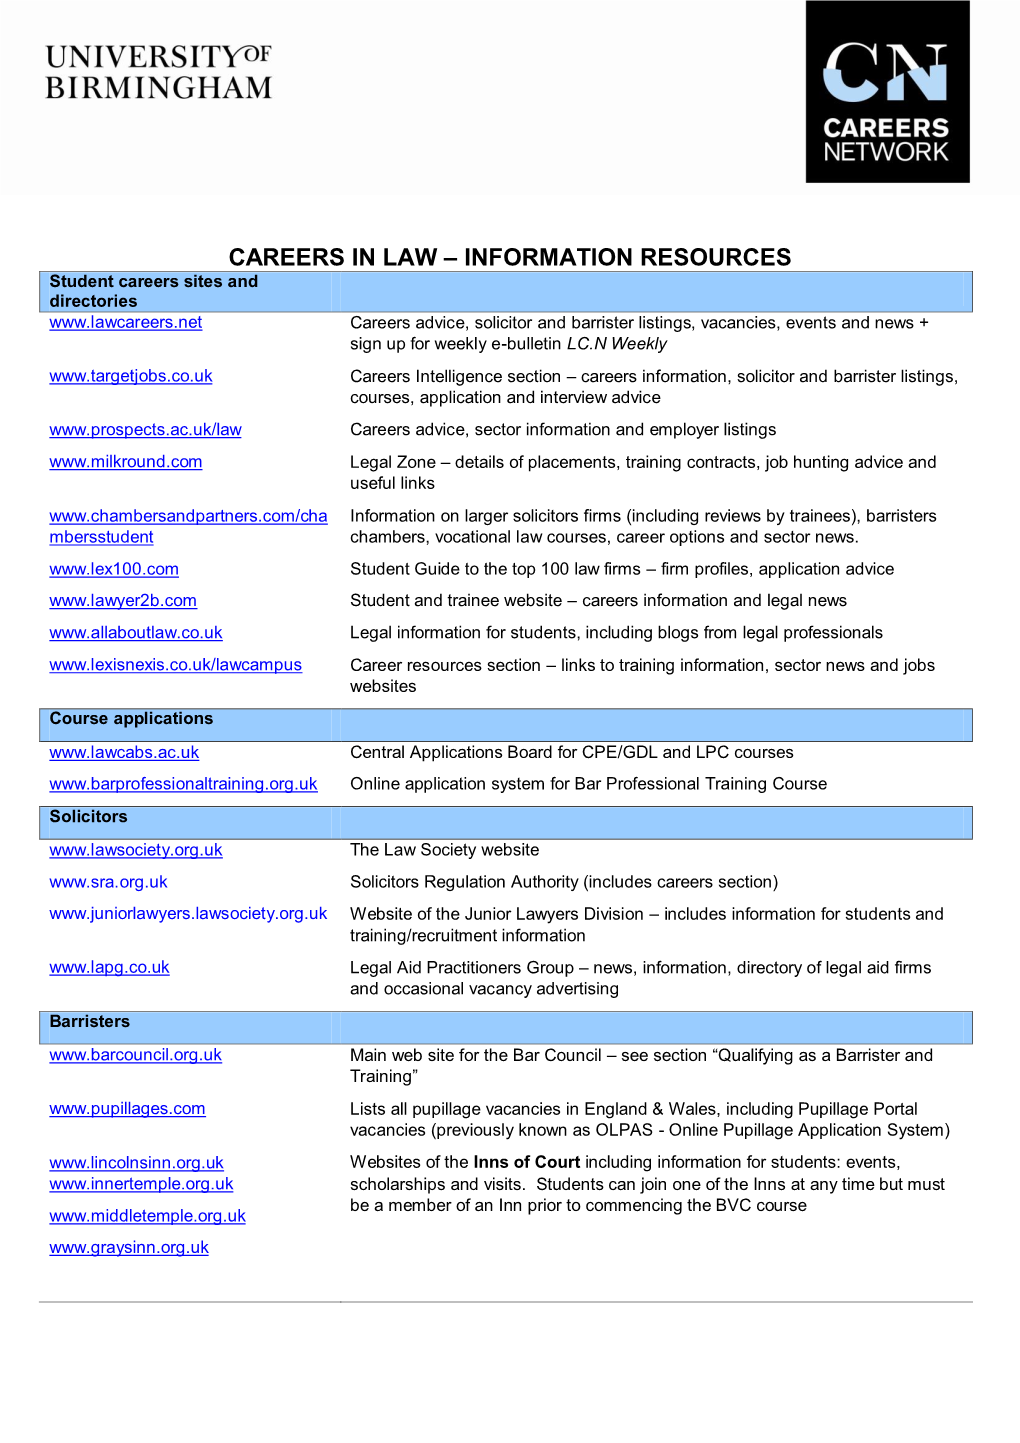 Careers in Law Information Resources (PDF